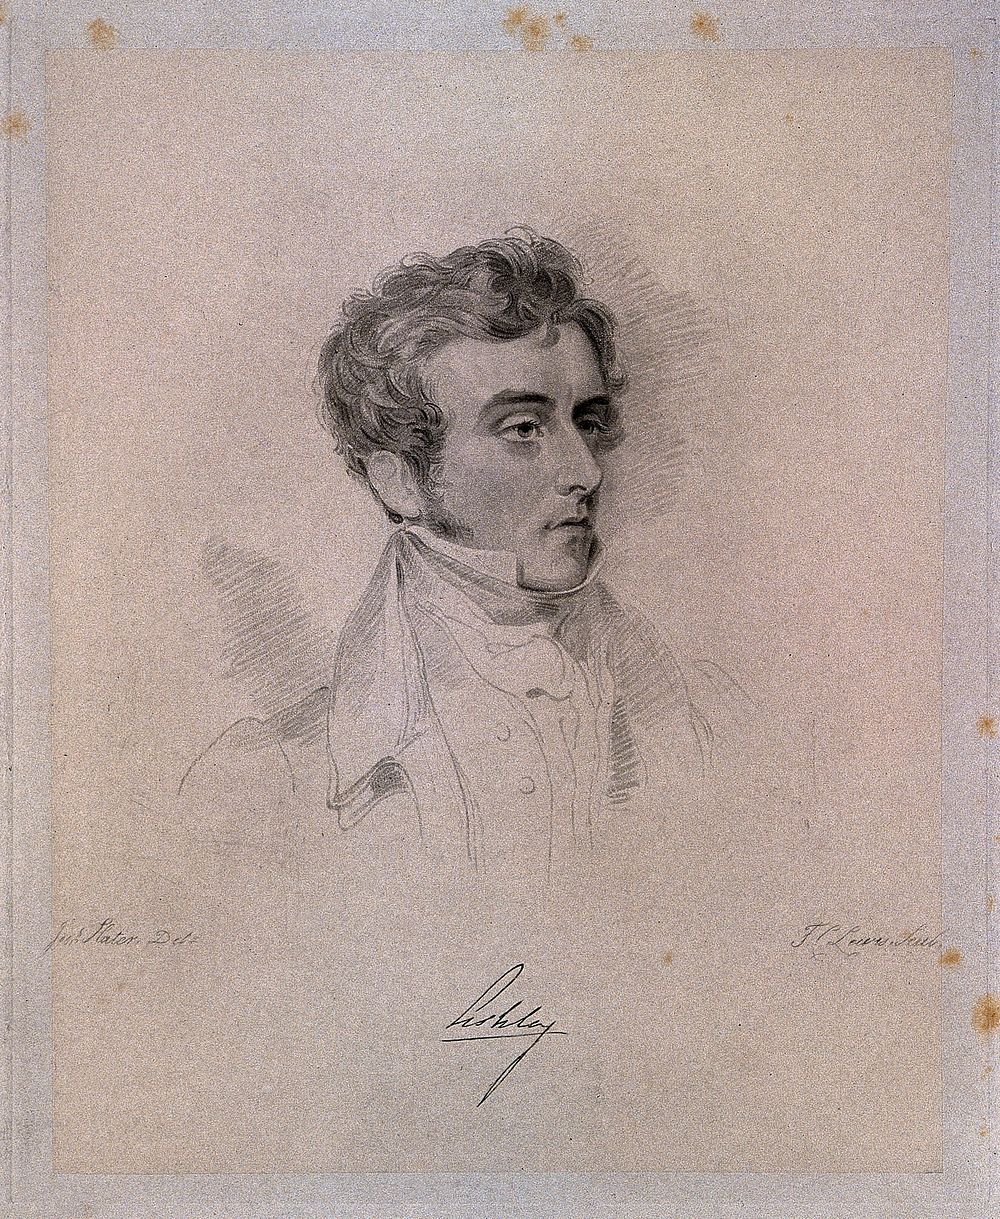 Anthony Ashley Cooper, 7th Earl of Shaftesbury. Stipple engraving by F. C. Lewis after J. Slater.